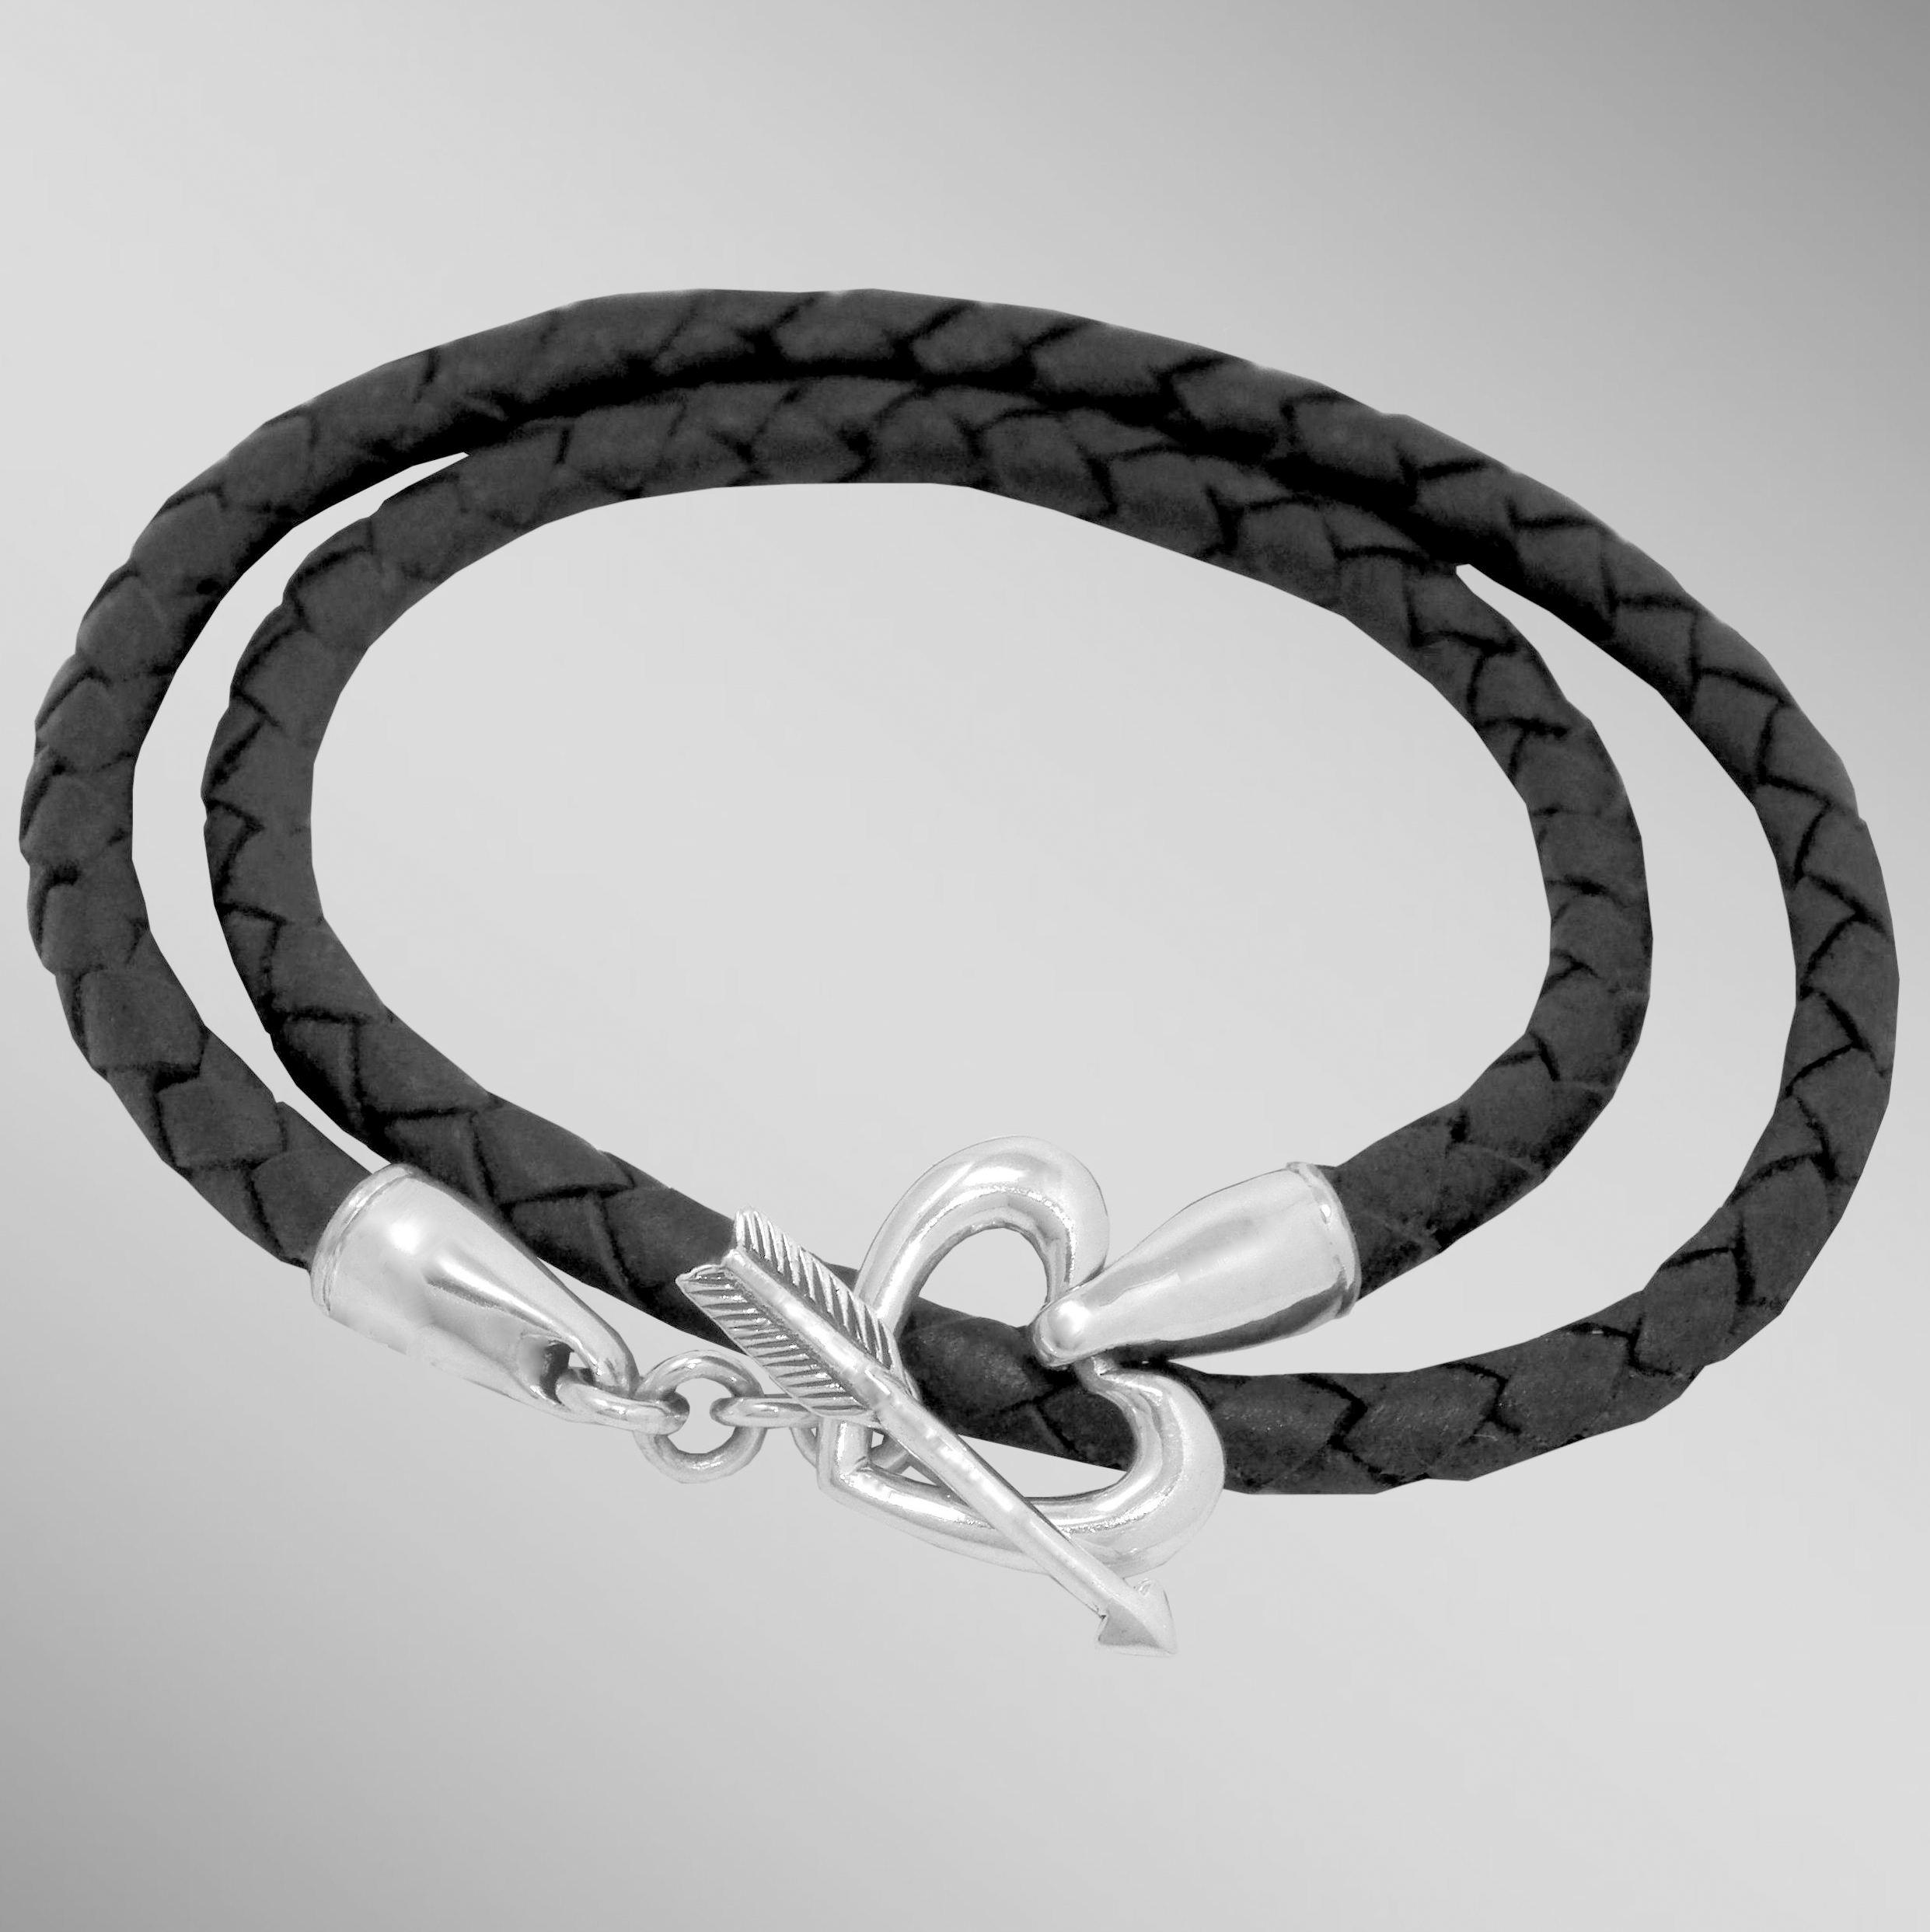 Black braided leather wrap bracelet with silver heart & arrow toggle clasp.  Arista.                                                                                                                                                                      